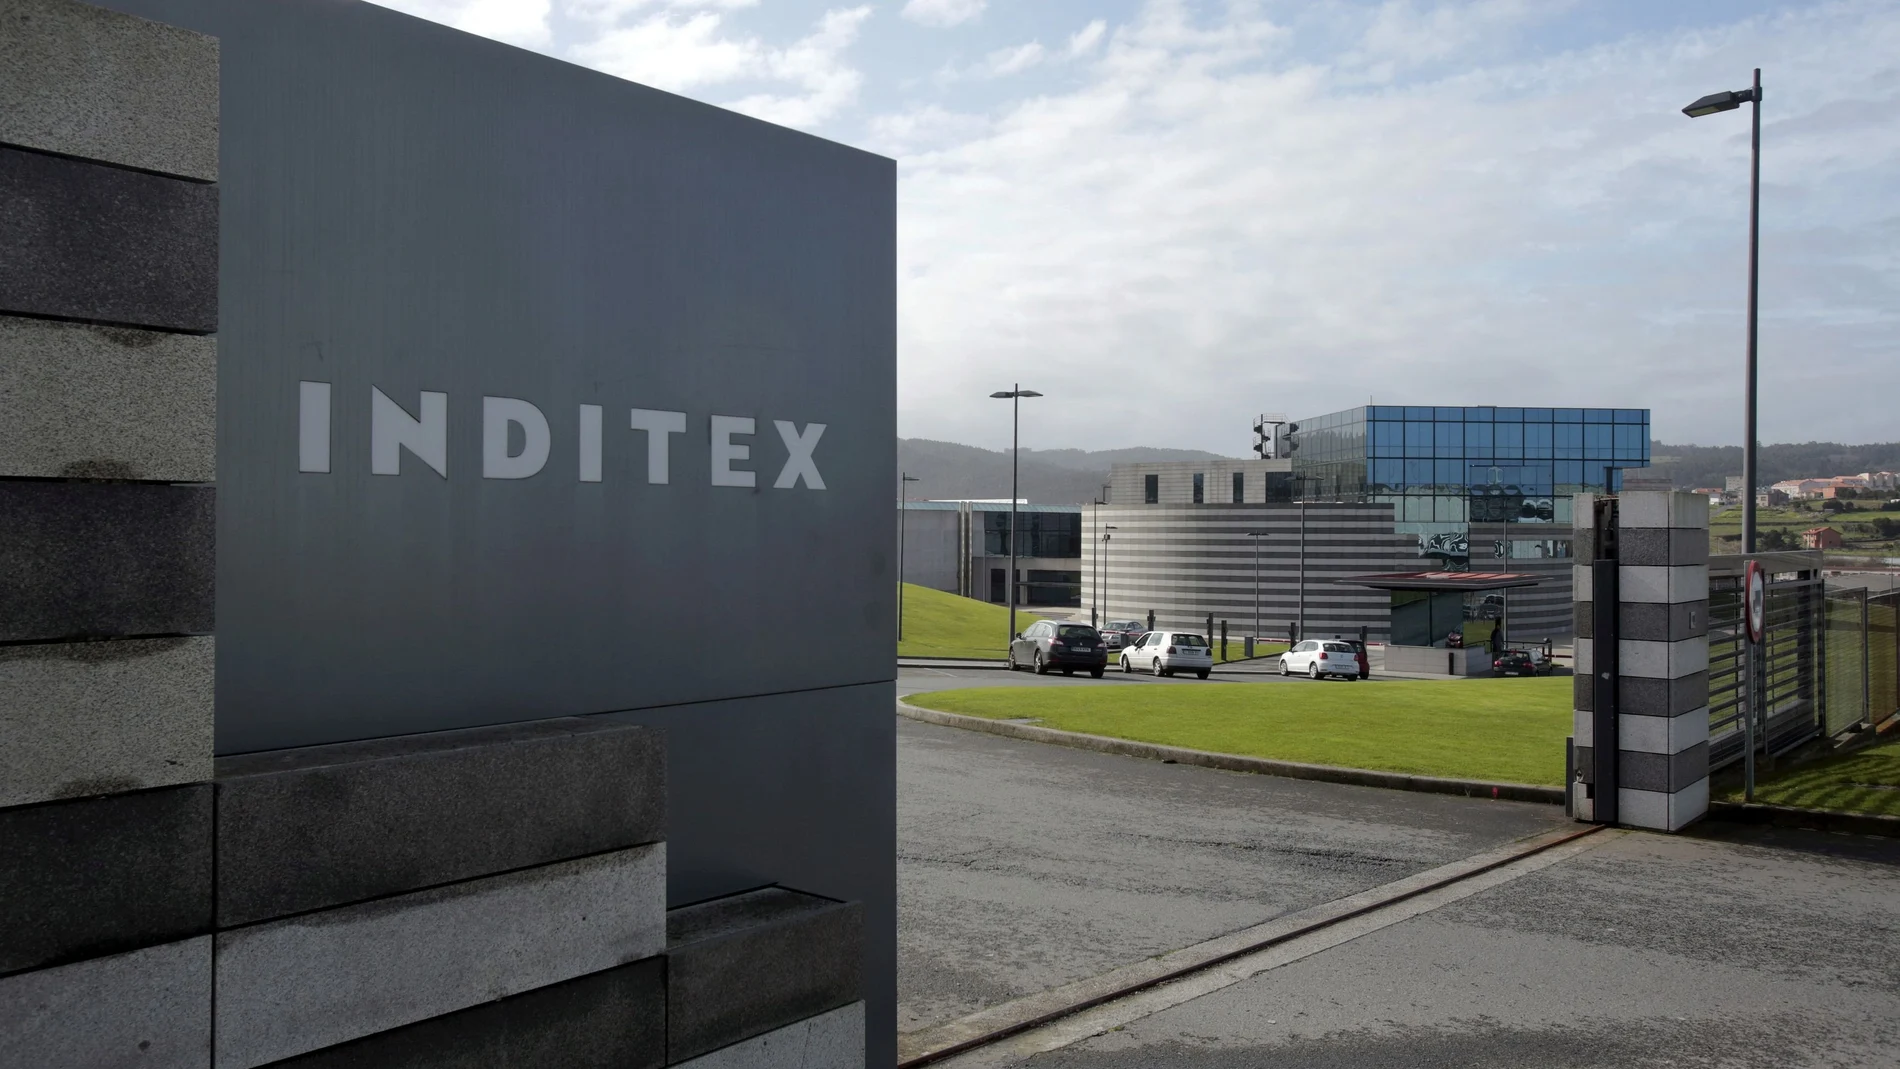 FILE PHOTO: An Inditex logo is seen at the entrance of a Zara factory, the headquarters of Inditex group, in Arteixo